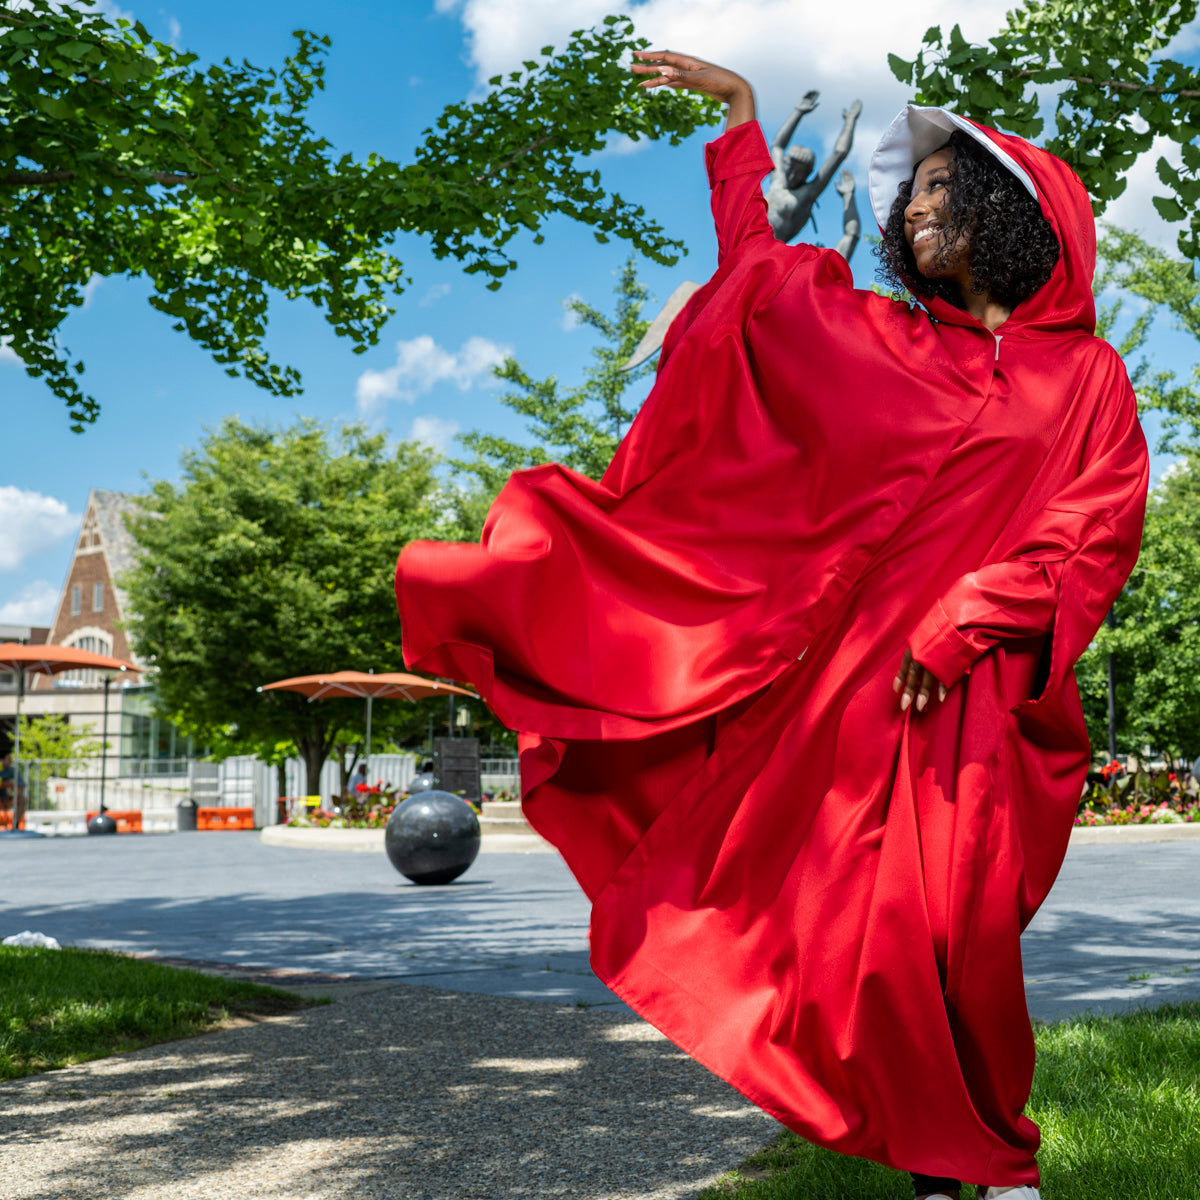 The Handmaid's Tale Red Cloak and White Hat Costume Dance pose